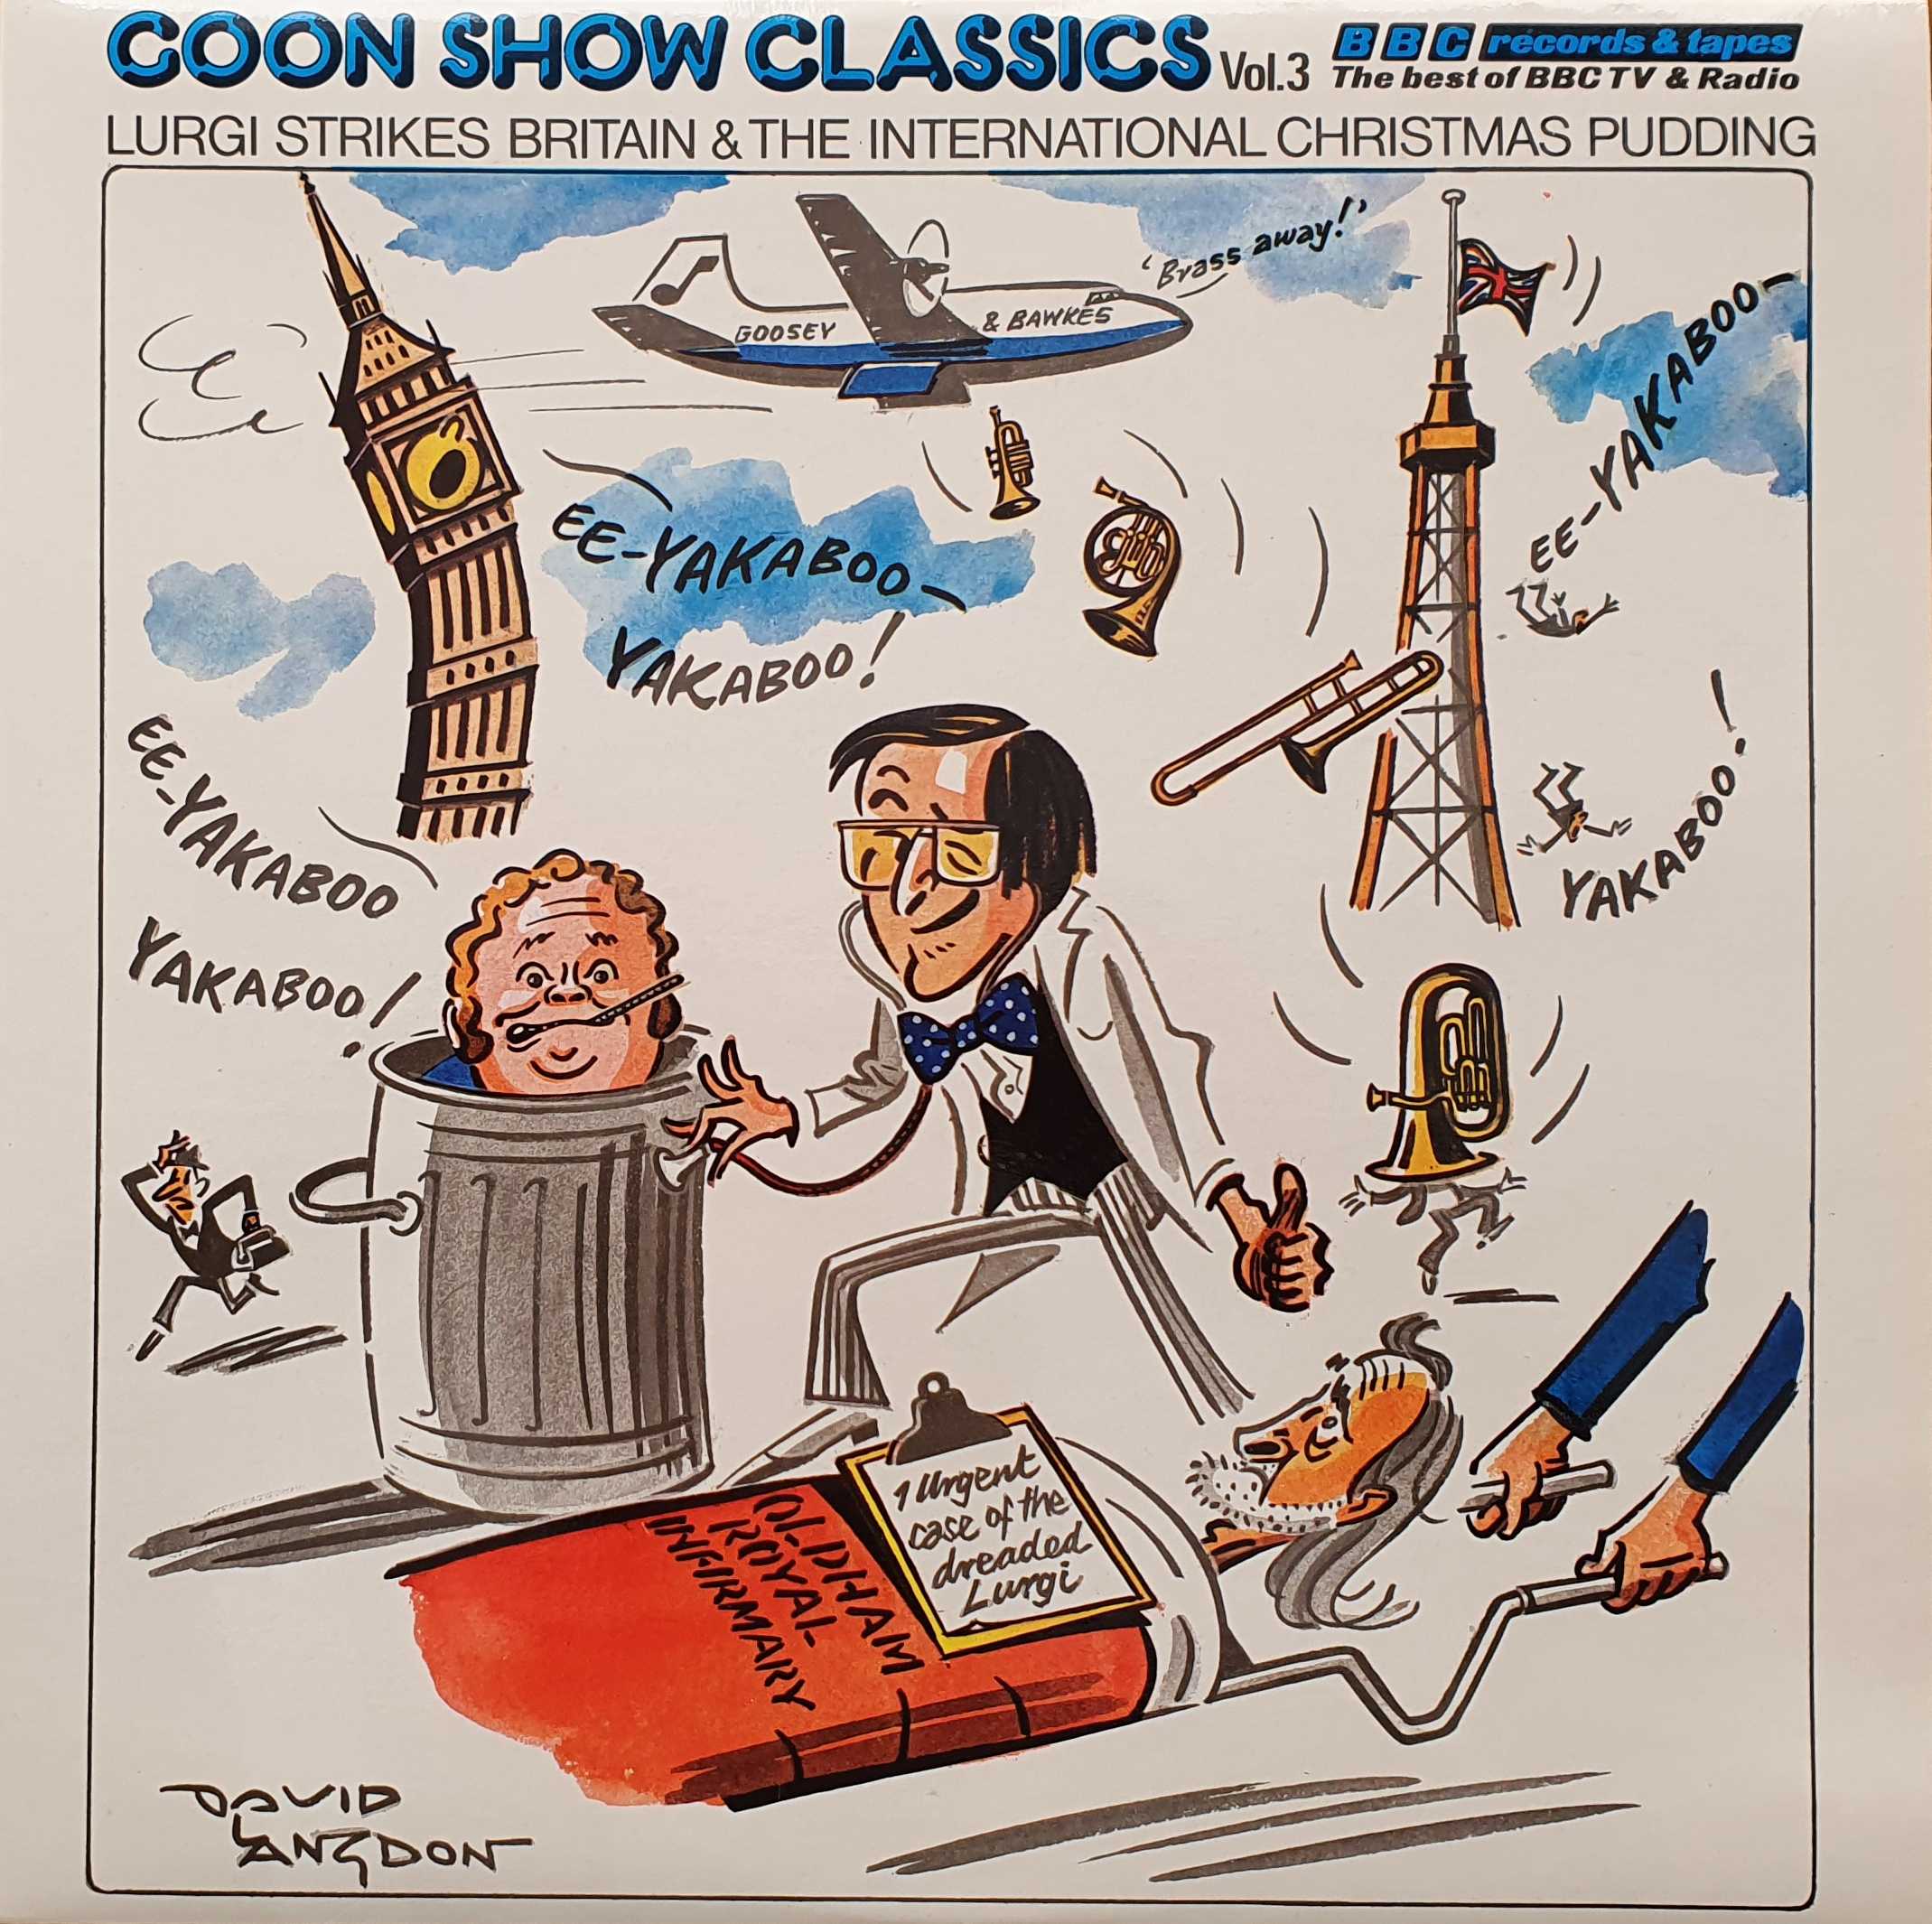 Picture of Goon Show classics vol. 3 by artist The Goon Show from the BBC albums - Records and Tapes library